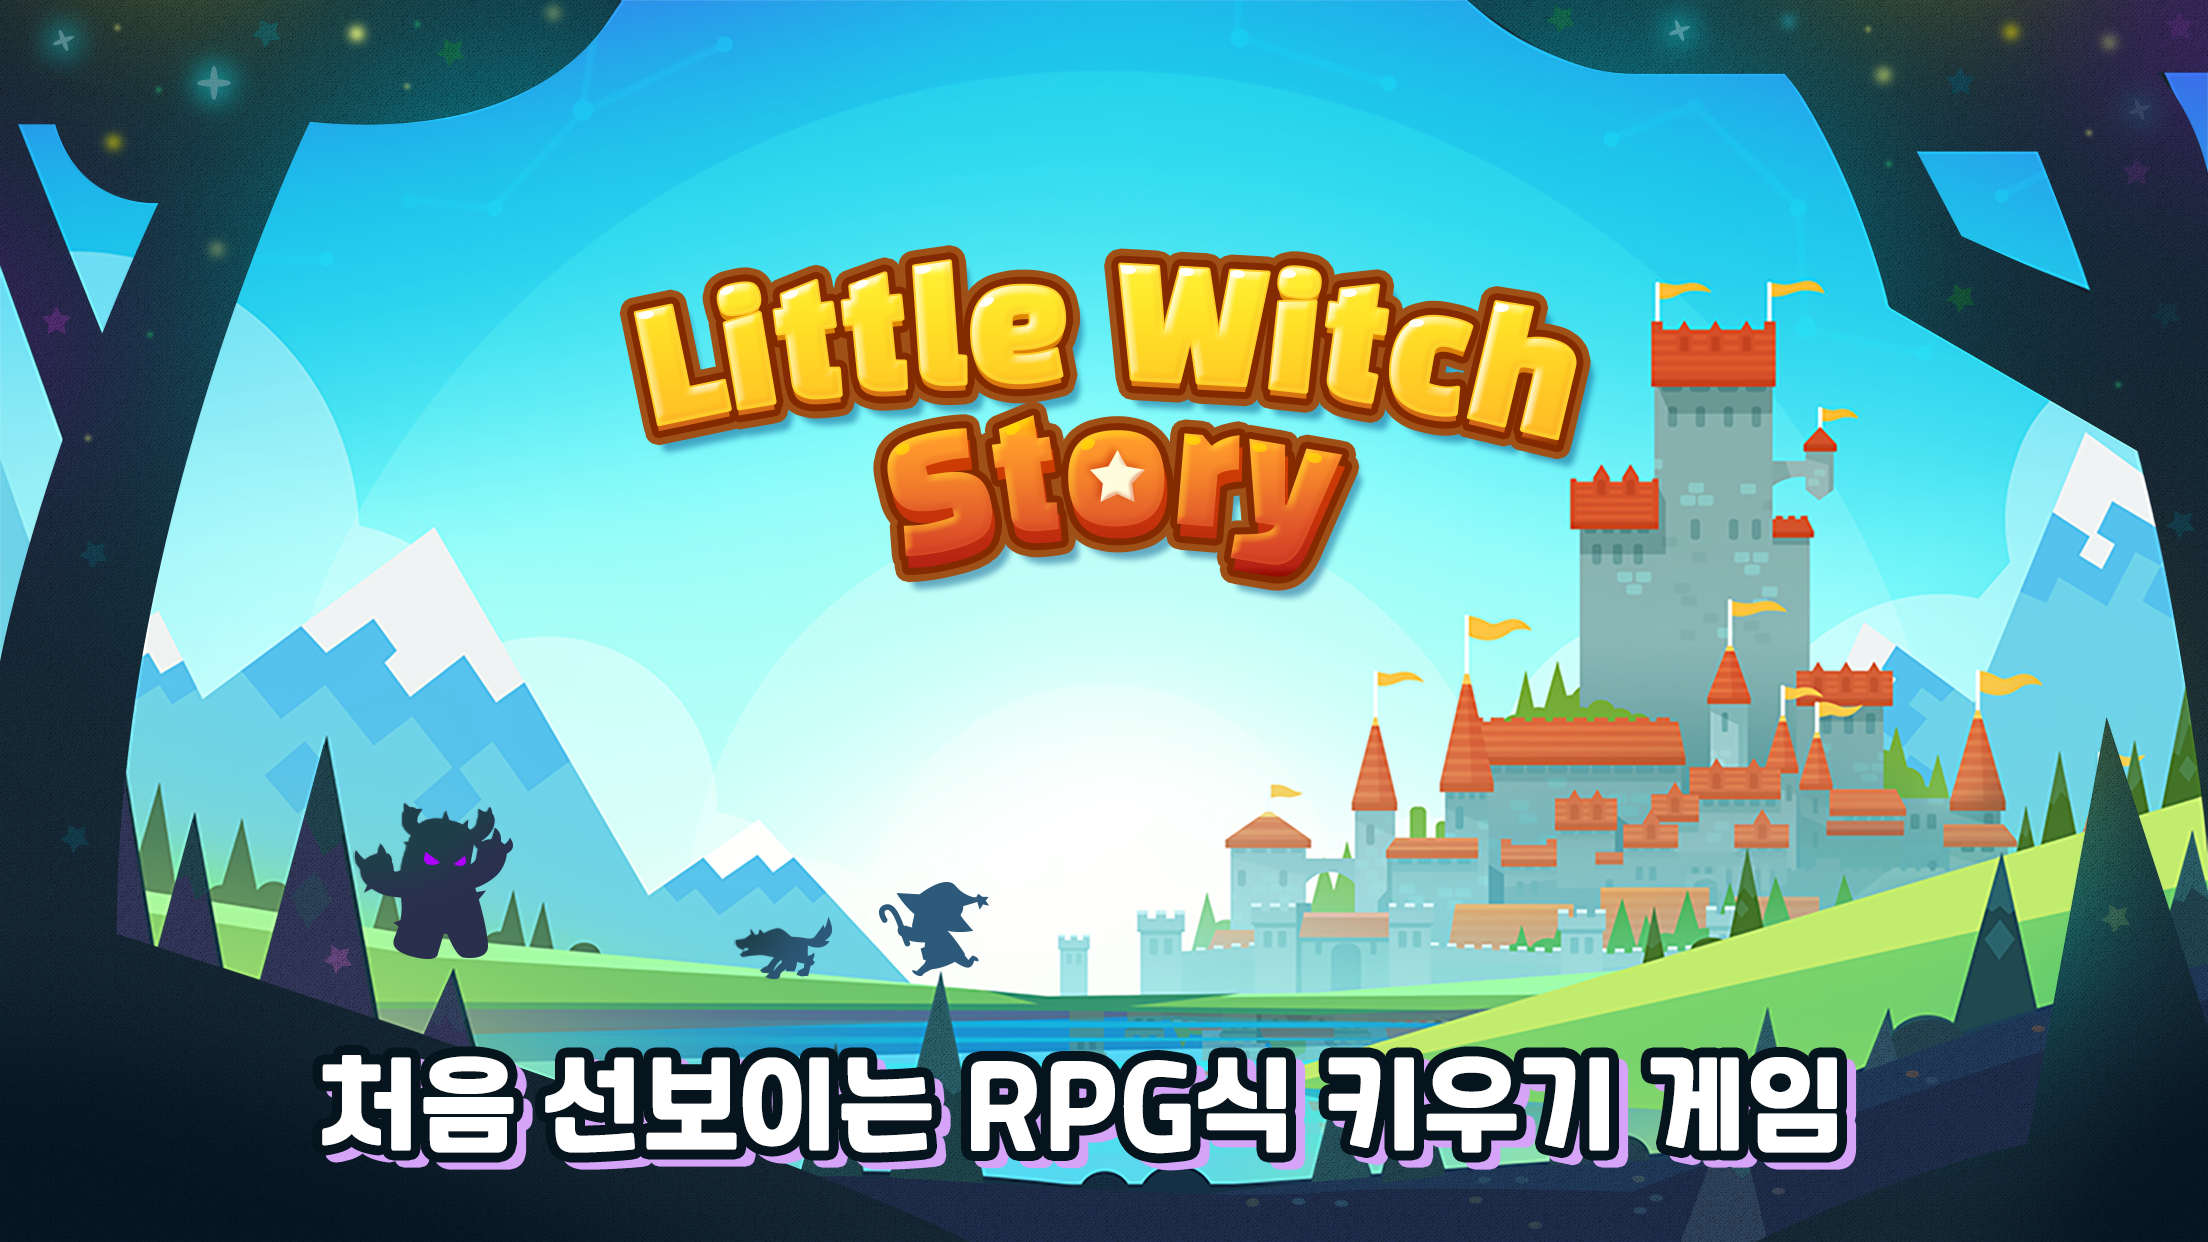 Screenshot 1 of little witch story 1.0.7